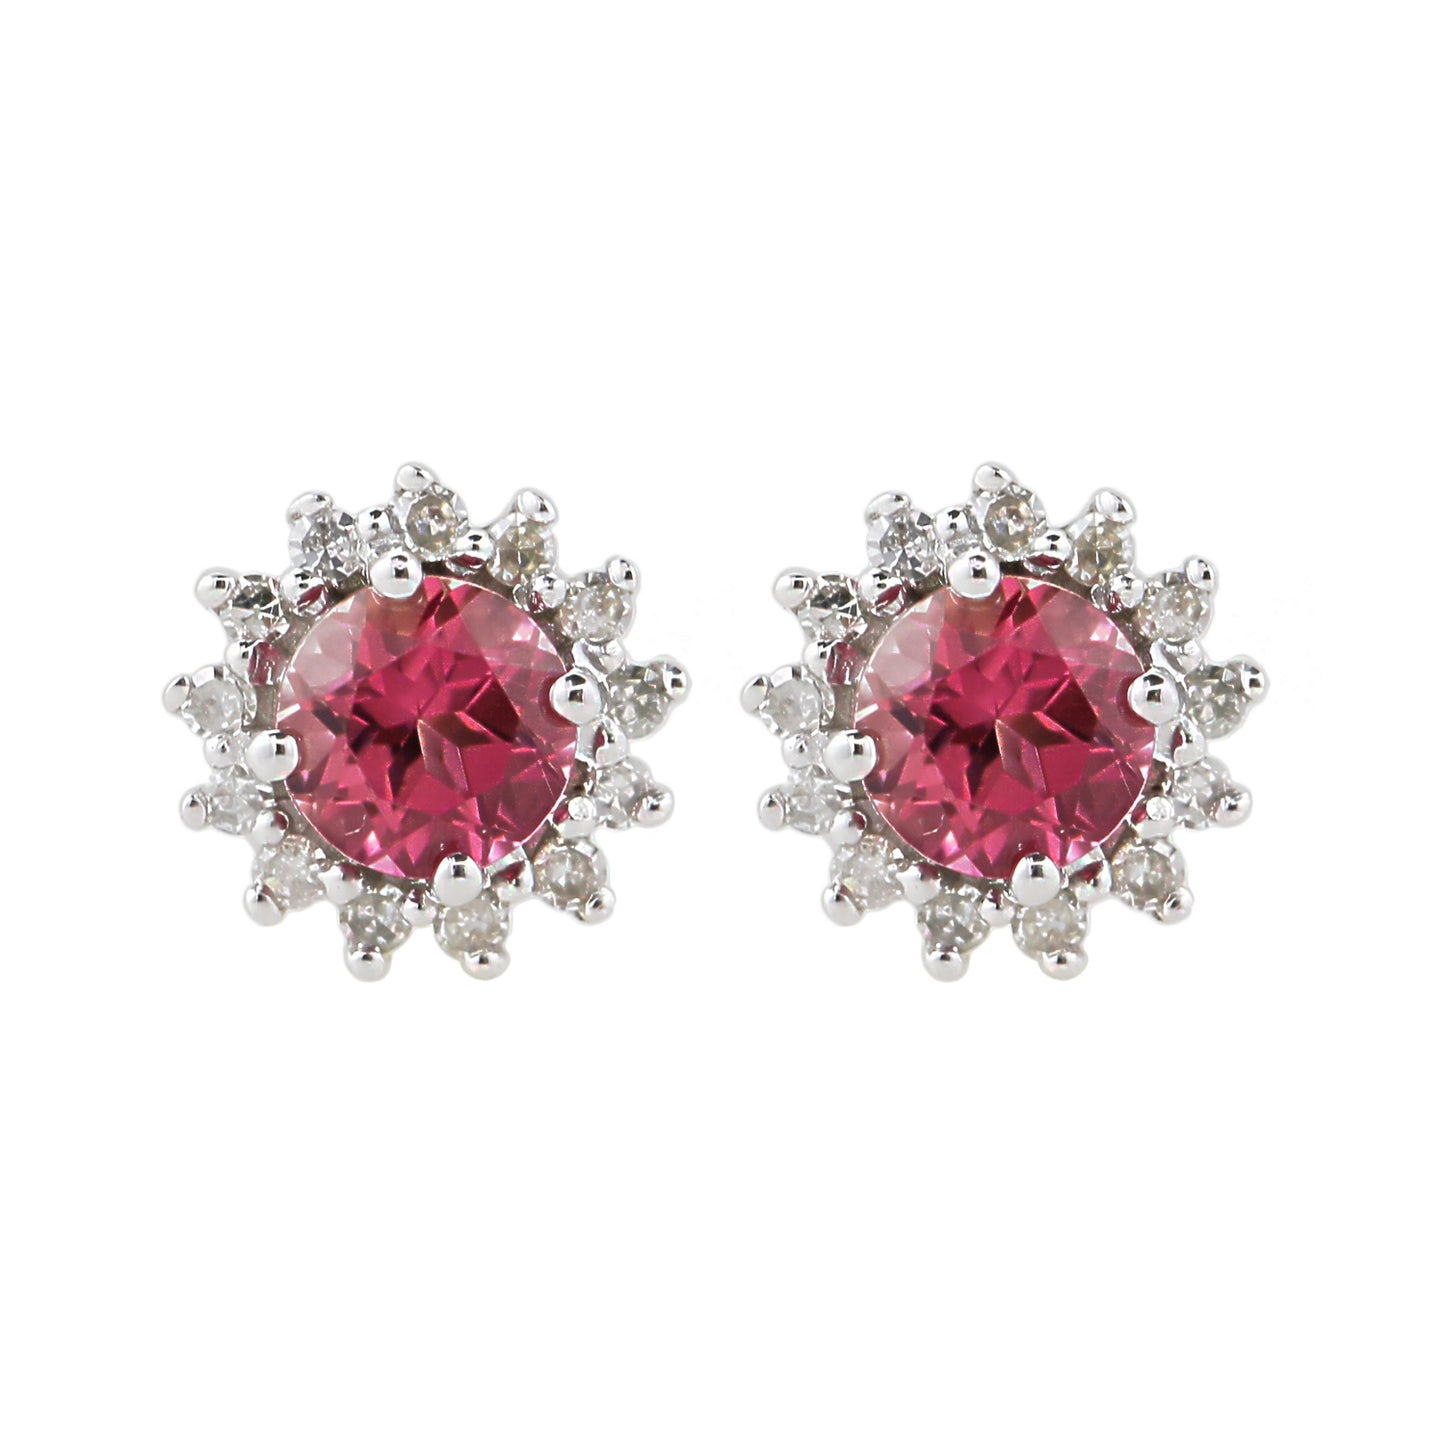 Pinctore Sterling Silver 1.3ctw pink-tourmaline and White Zircon Stud Earrings 0.7'L - pinctore